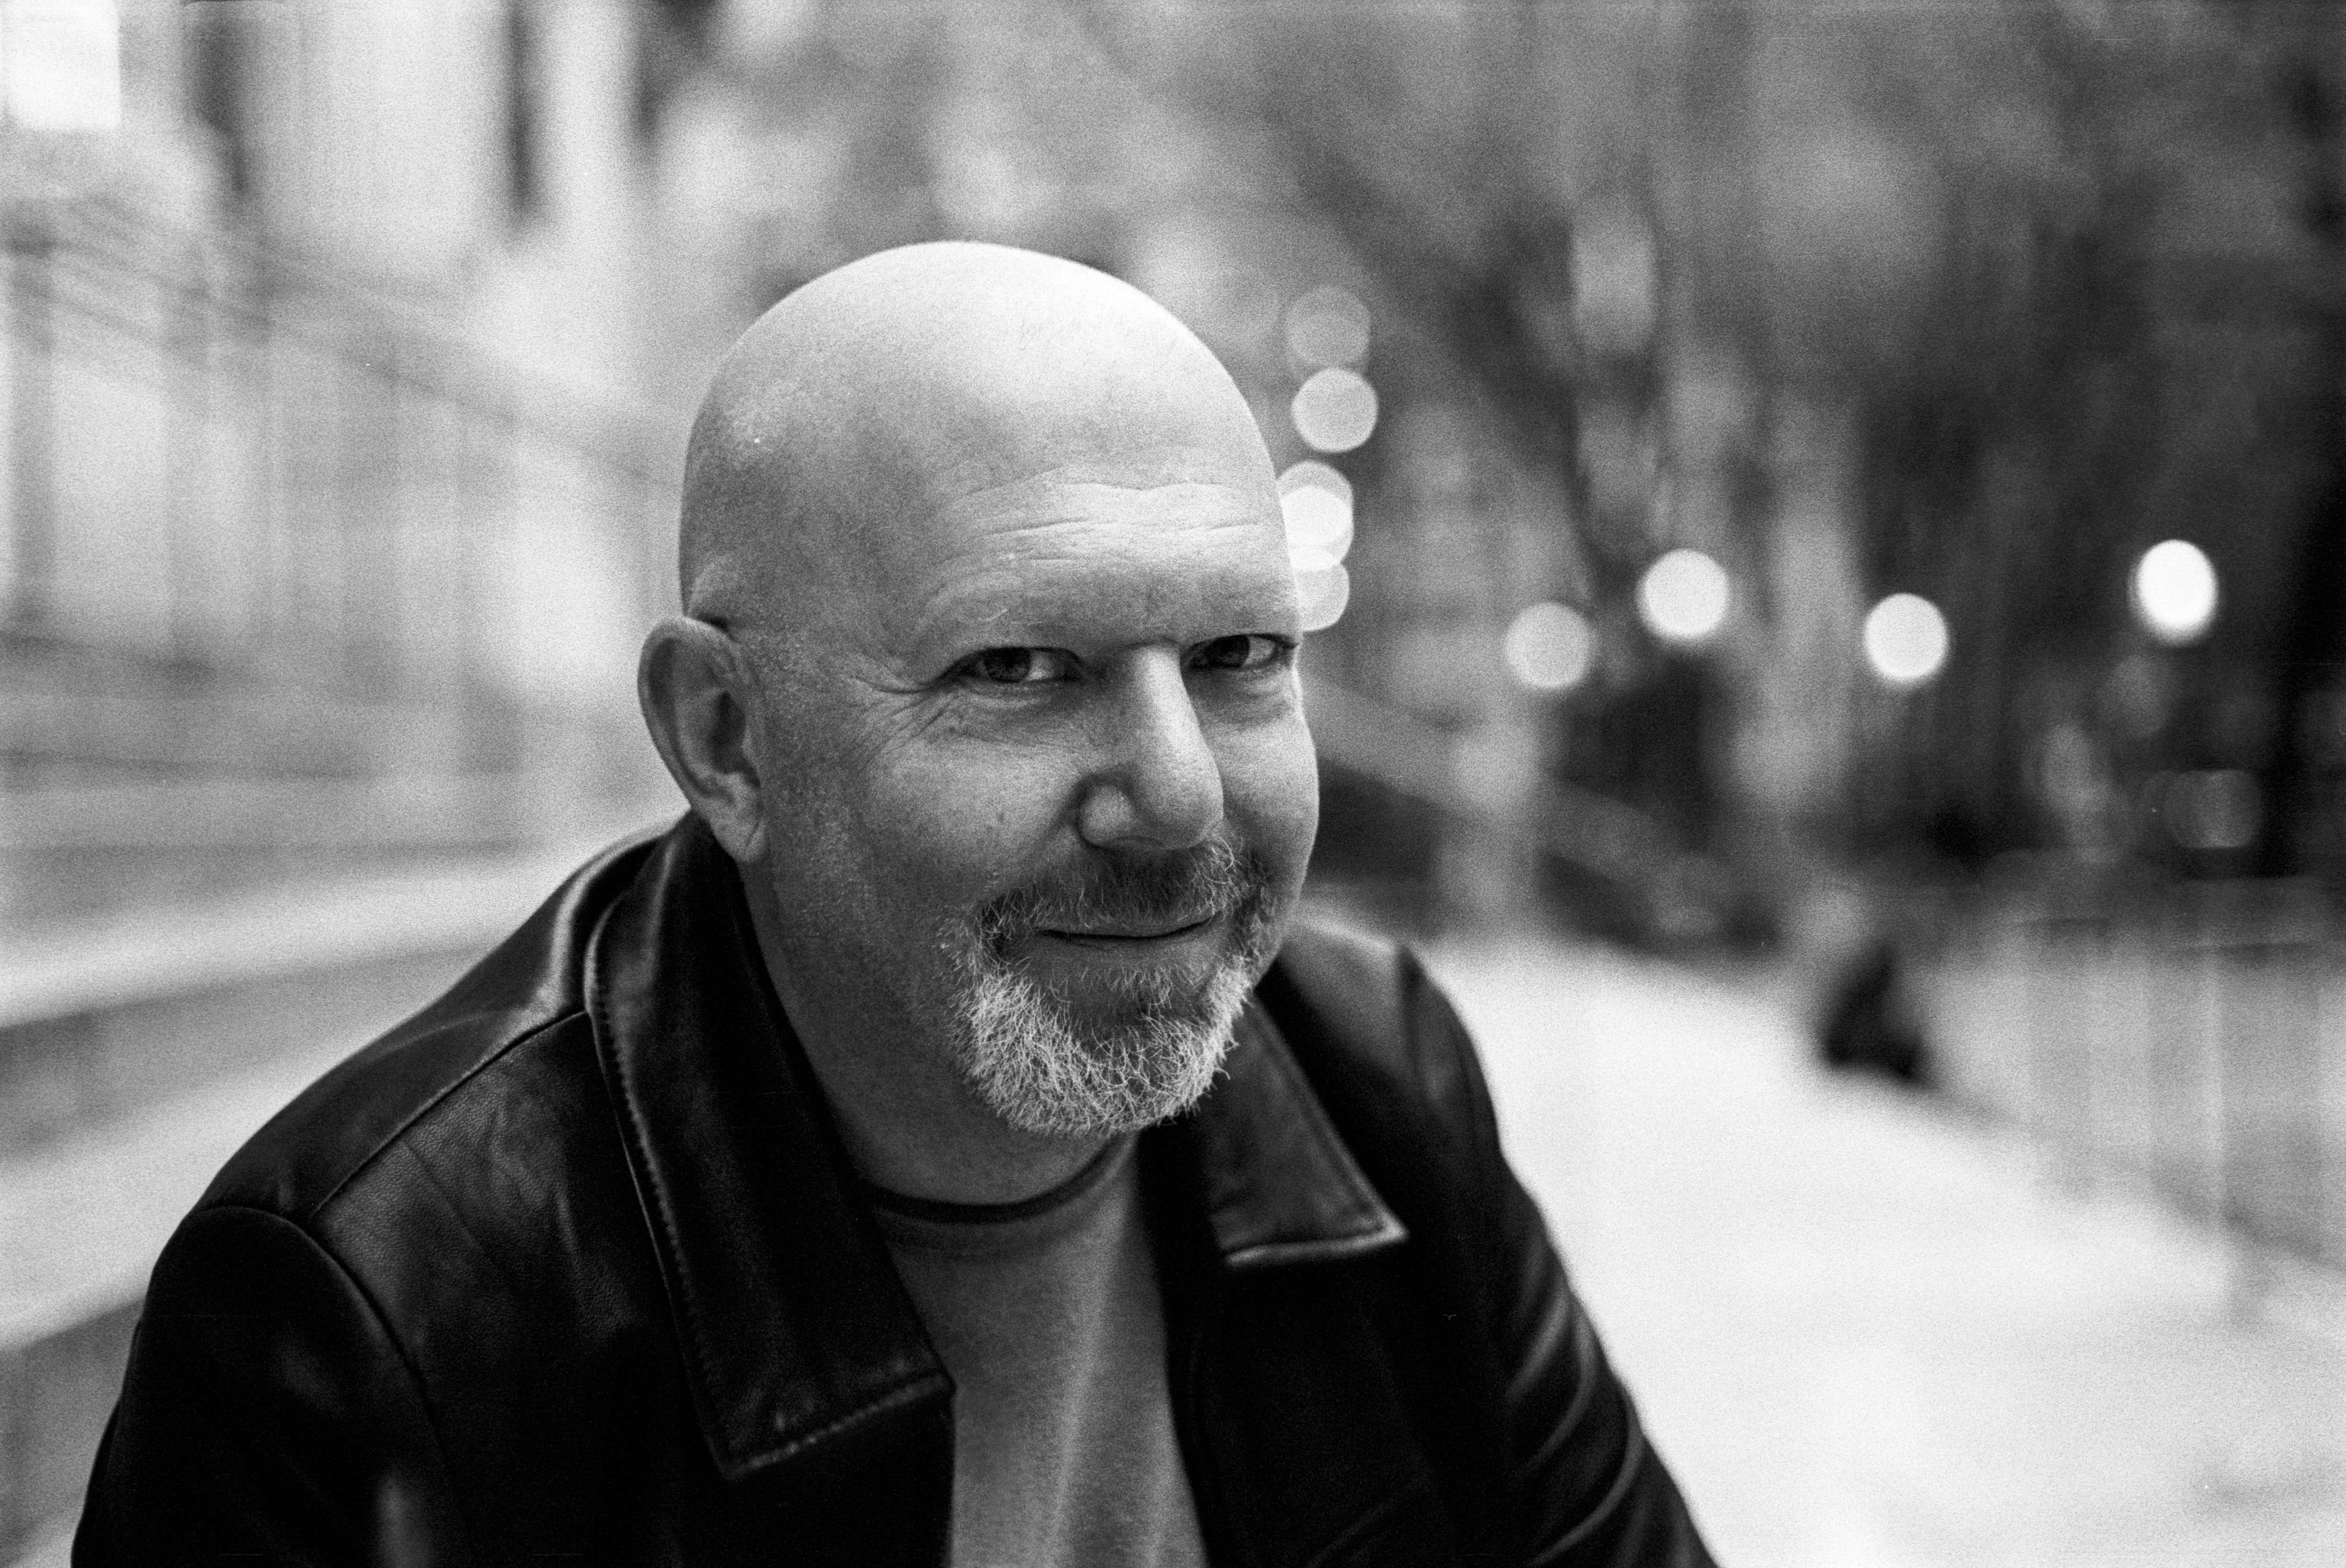 A black and white portrait of Marc Guggenheim